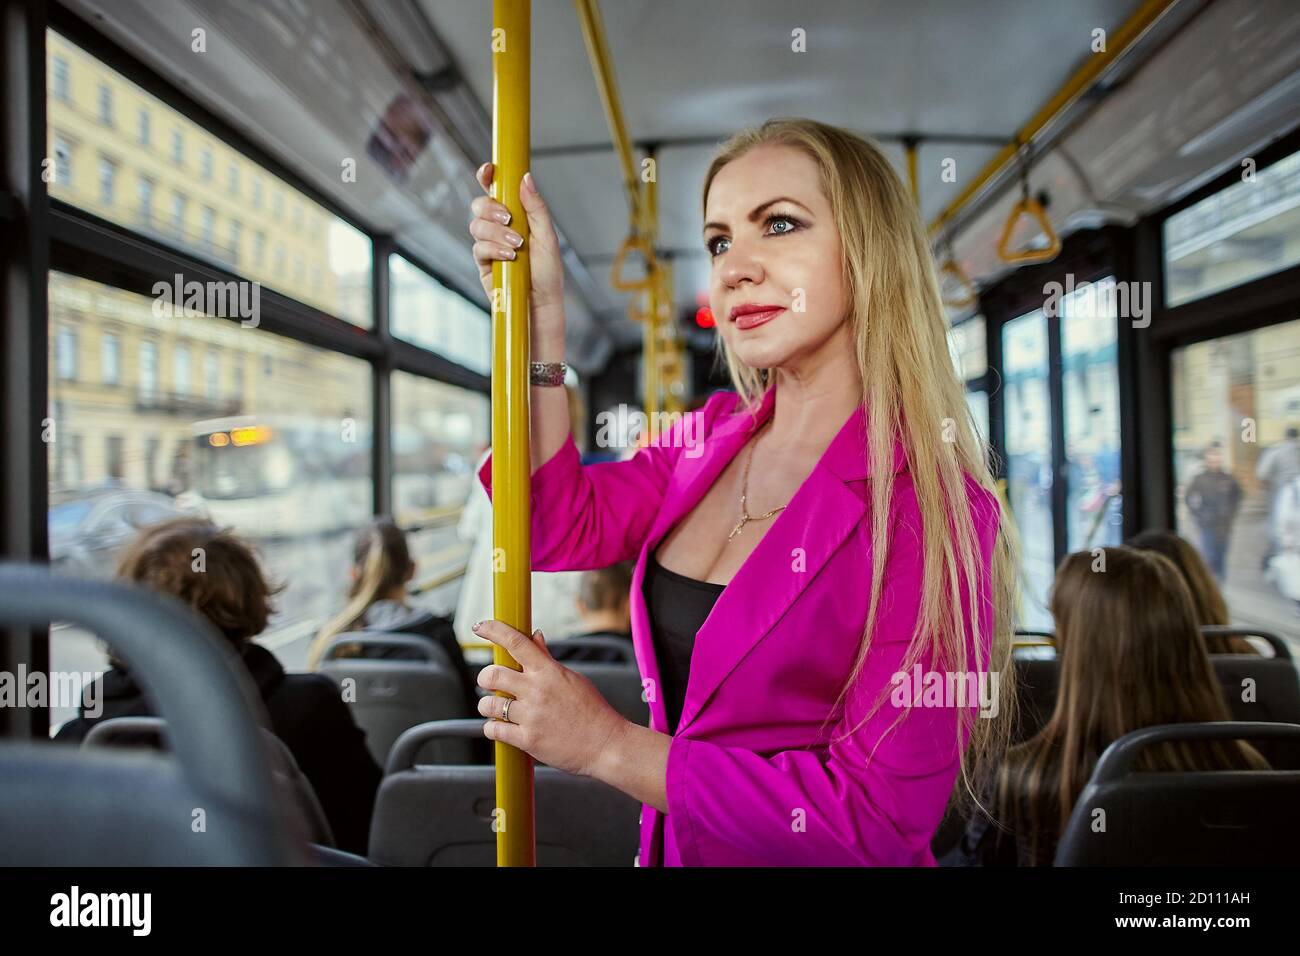 Caucasian woman dressed in pink, stands inside a bus or trolleybus. White female rides while standing in the passenger cabin of public transport and h Stock Photo